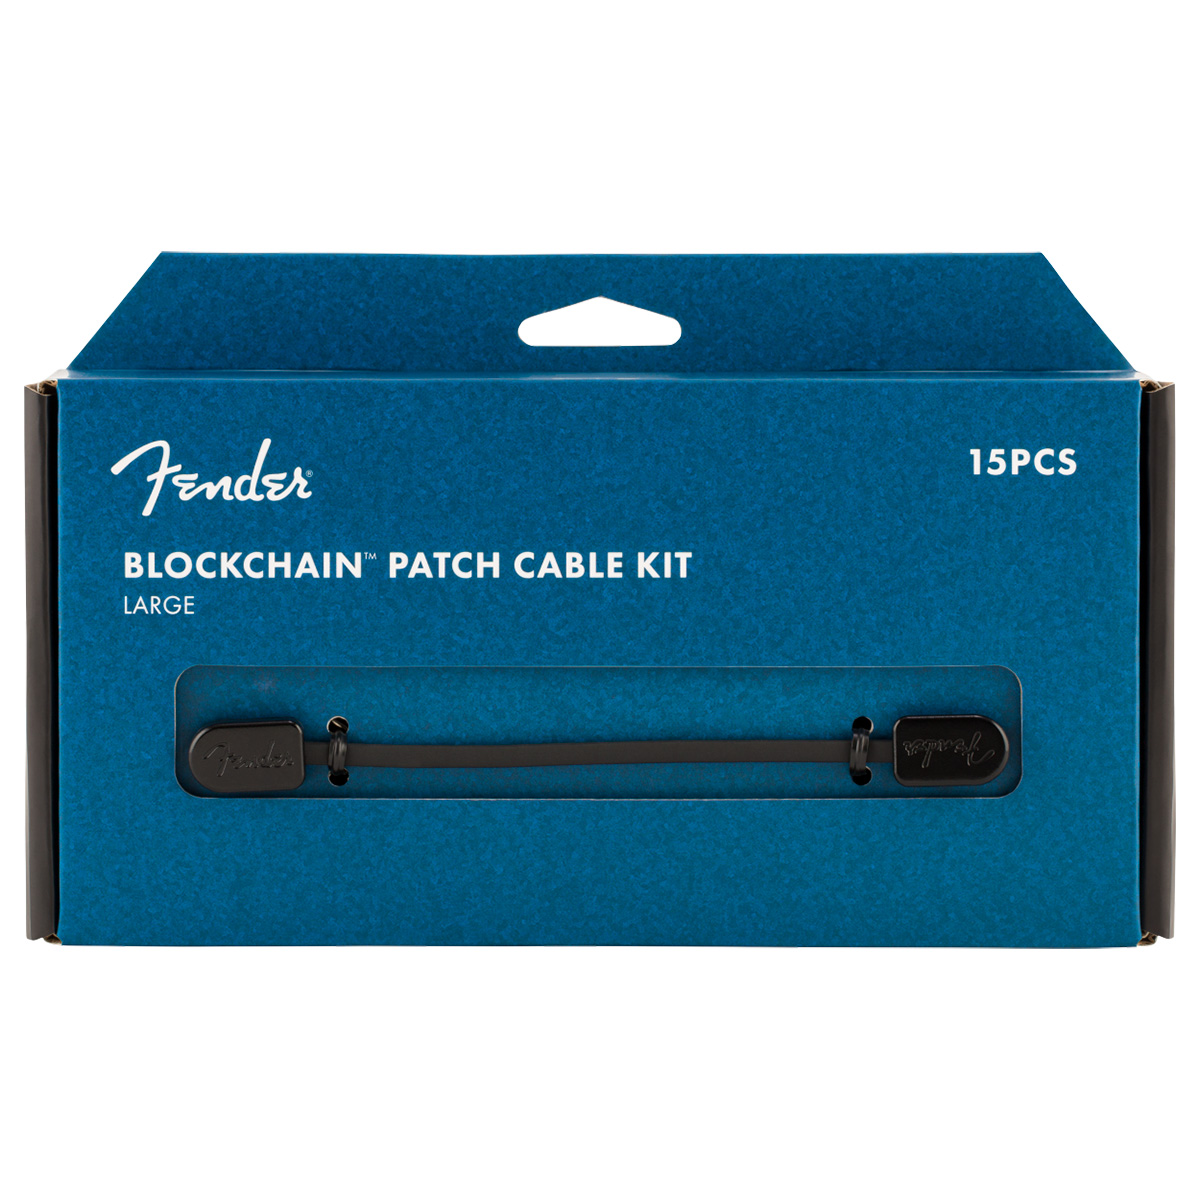 Fender Blockchain Patch Cable Kit Large Black パッチケーブルセット